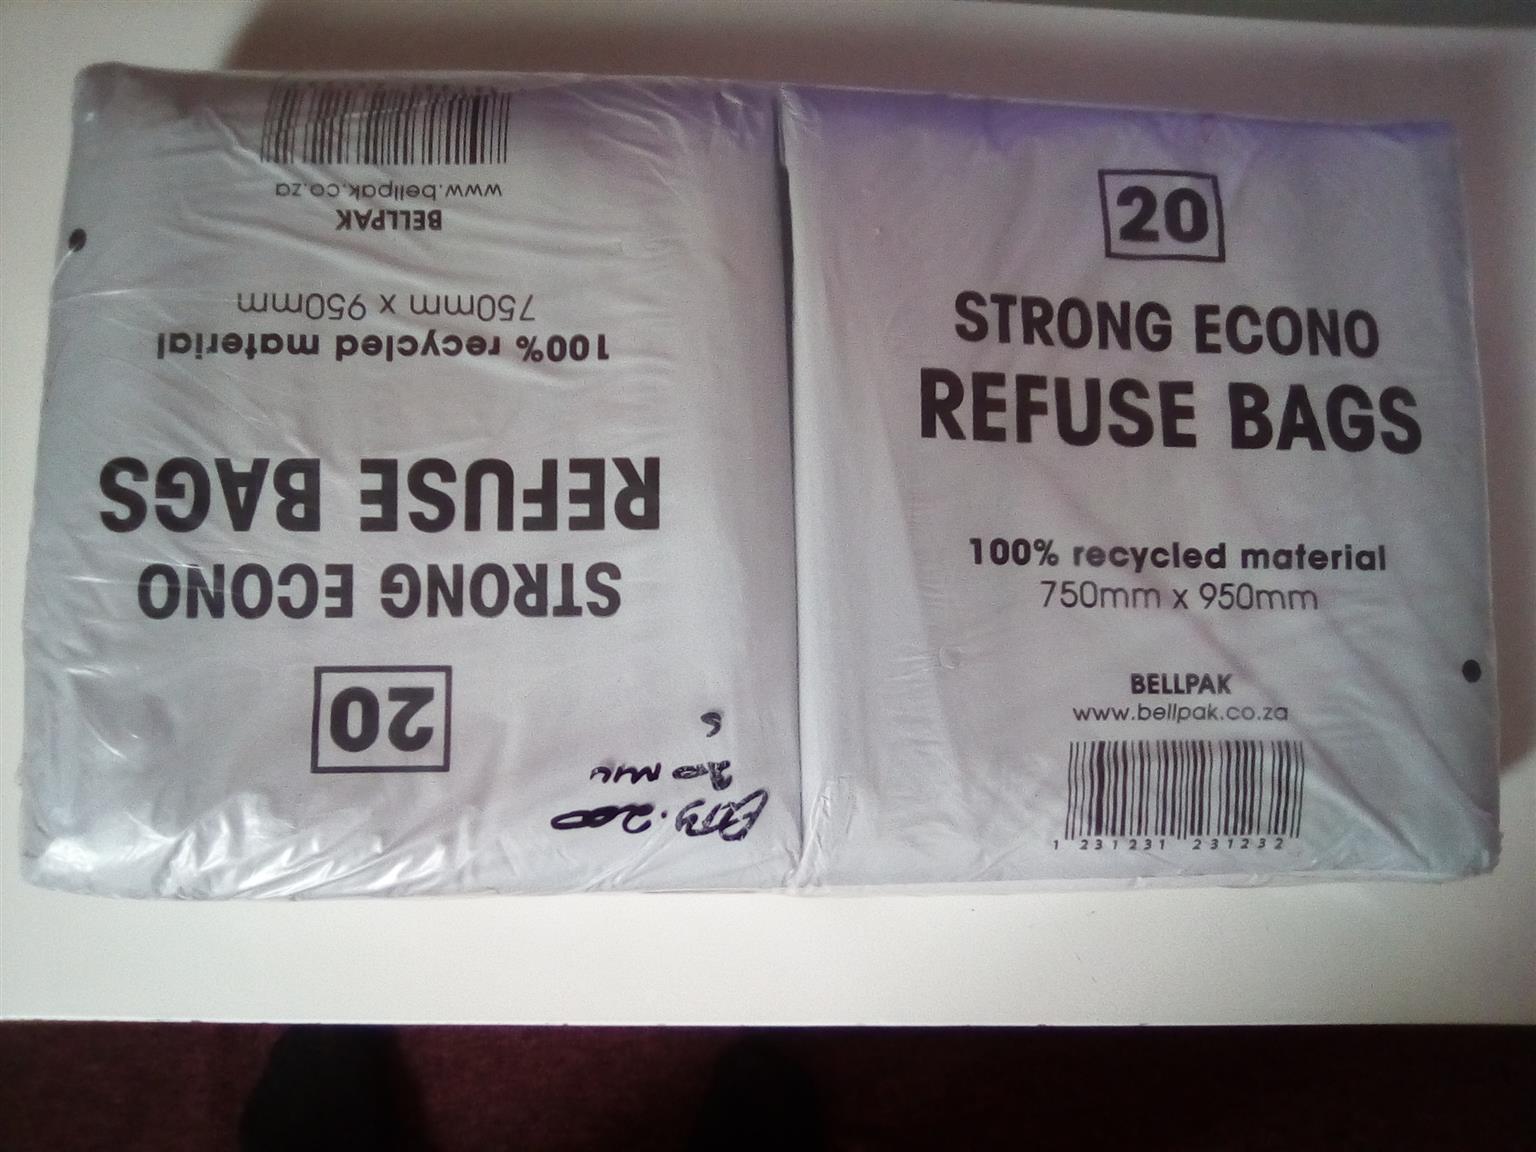 Black refuse bags and Packaging plastics